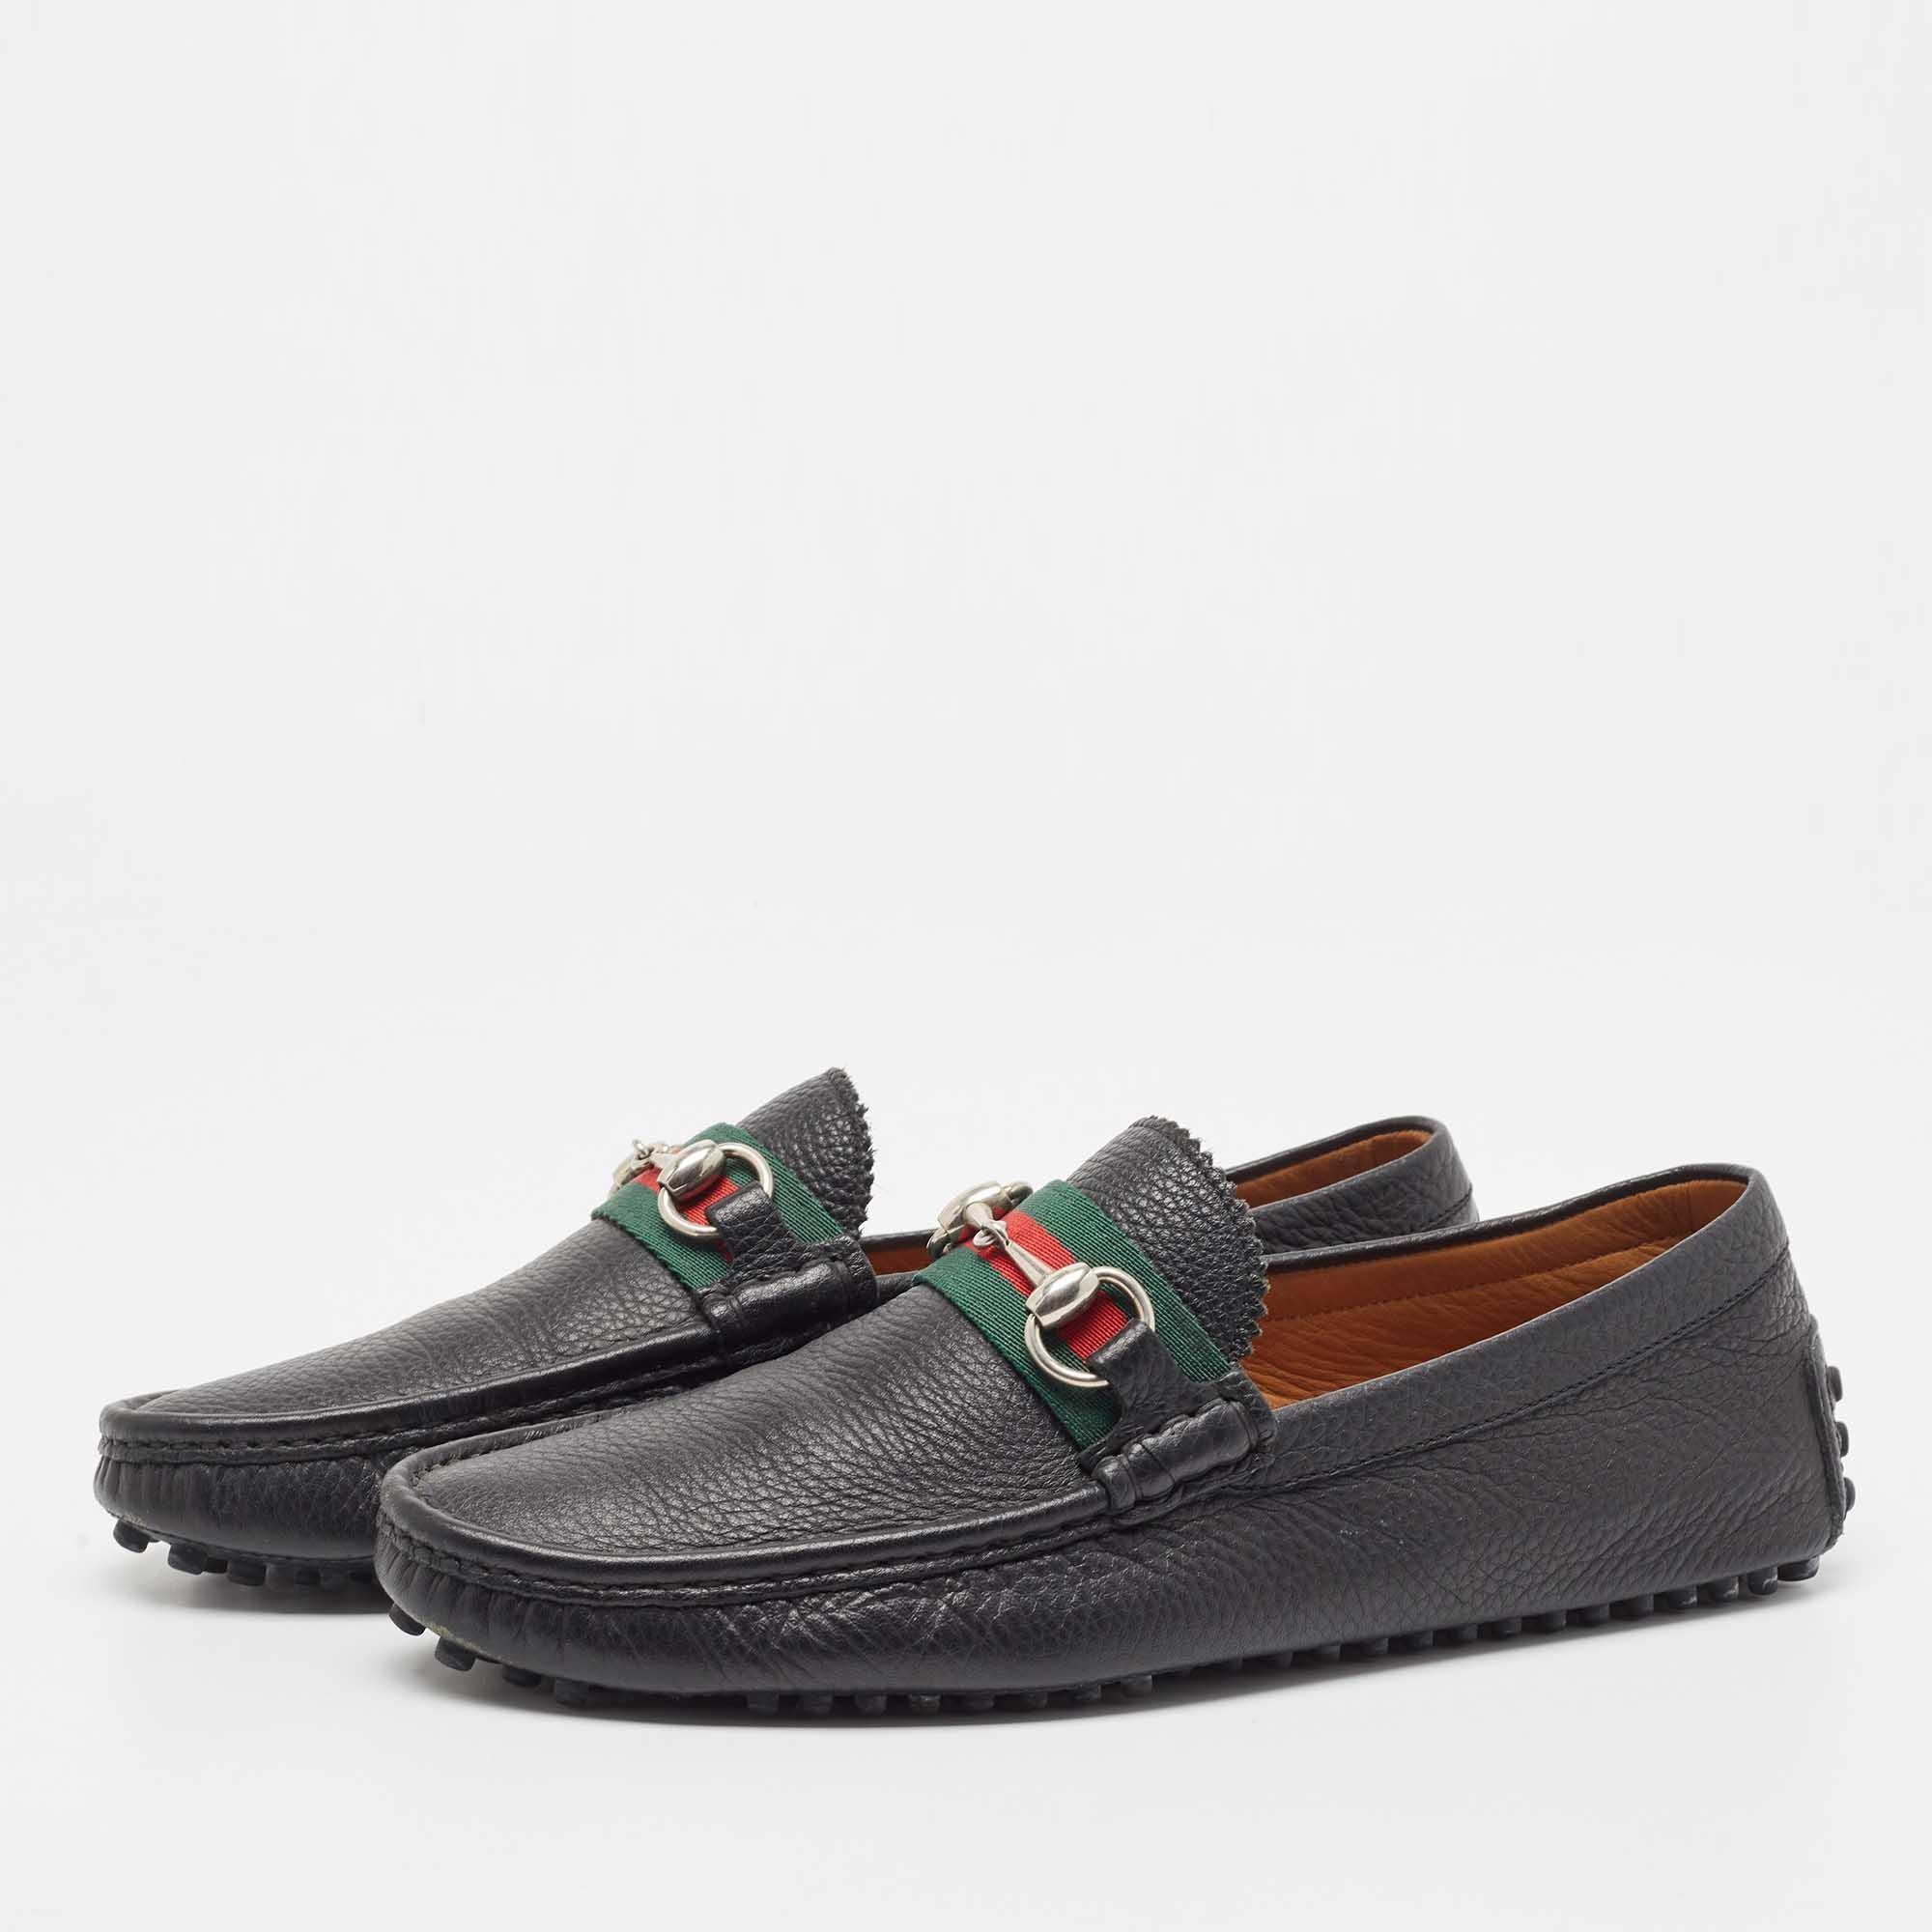 Gucci Black Leather Web Horsebit Loafers Size 41.5 For Sale 1